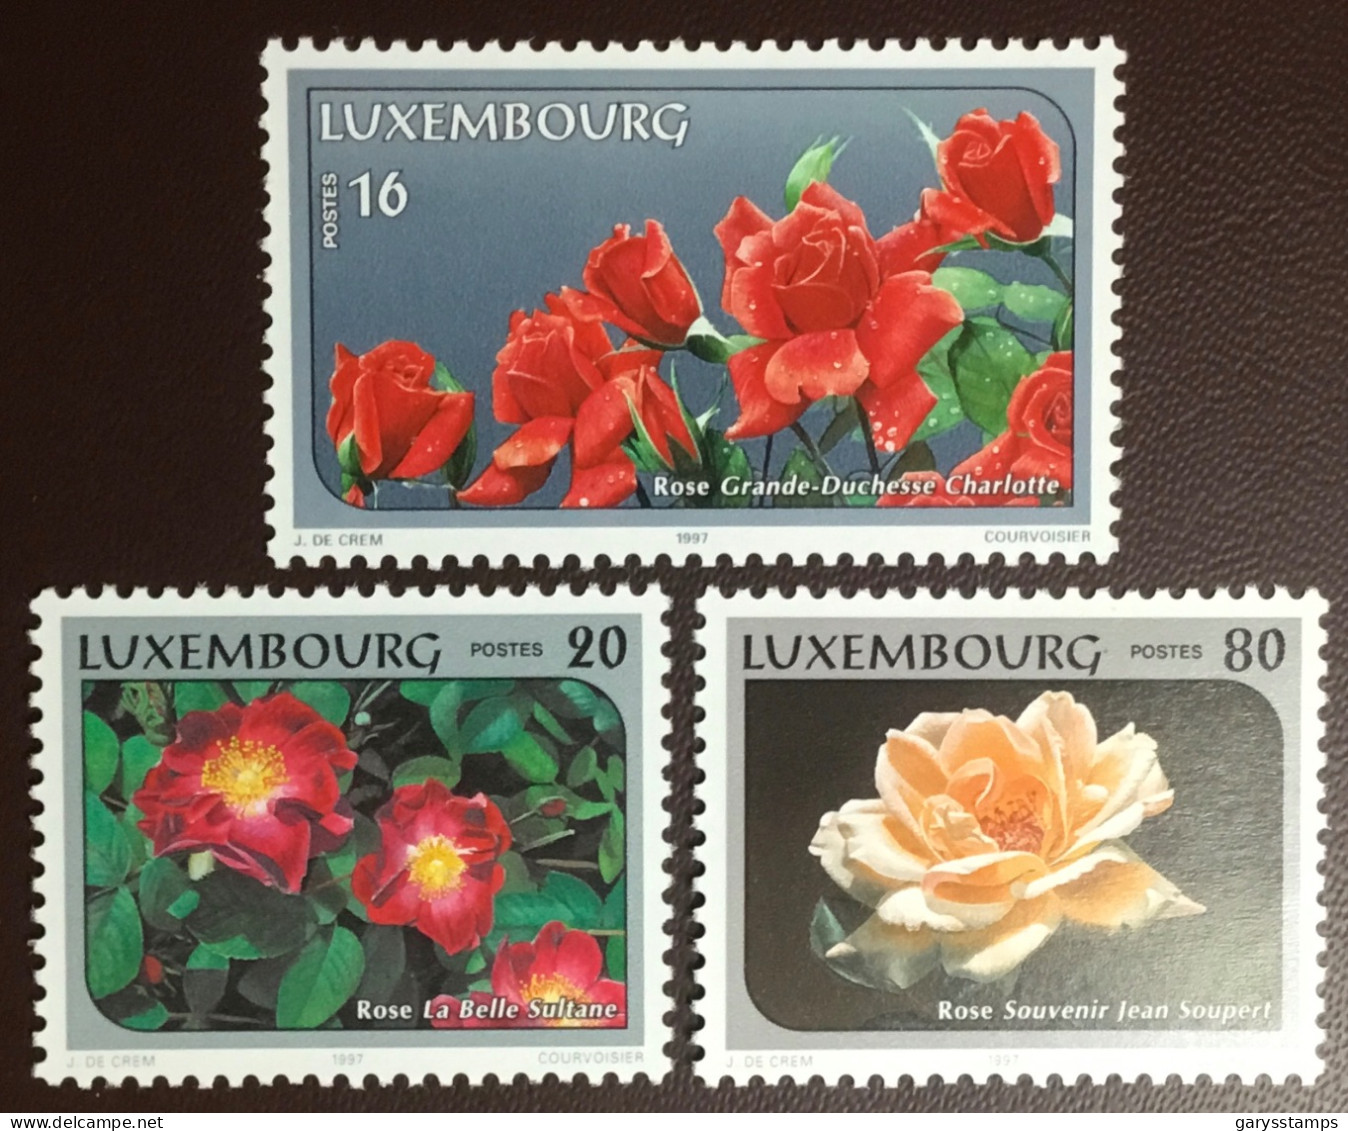 Luxembourg 1997 Rose Congress Roses Flowers MNH - Roses